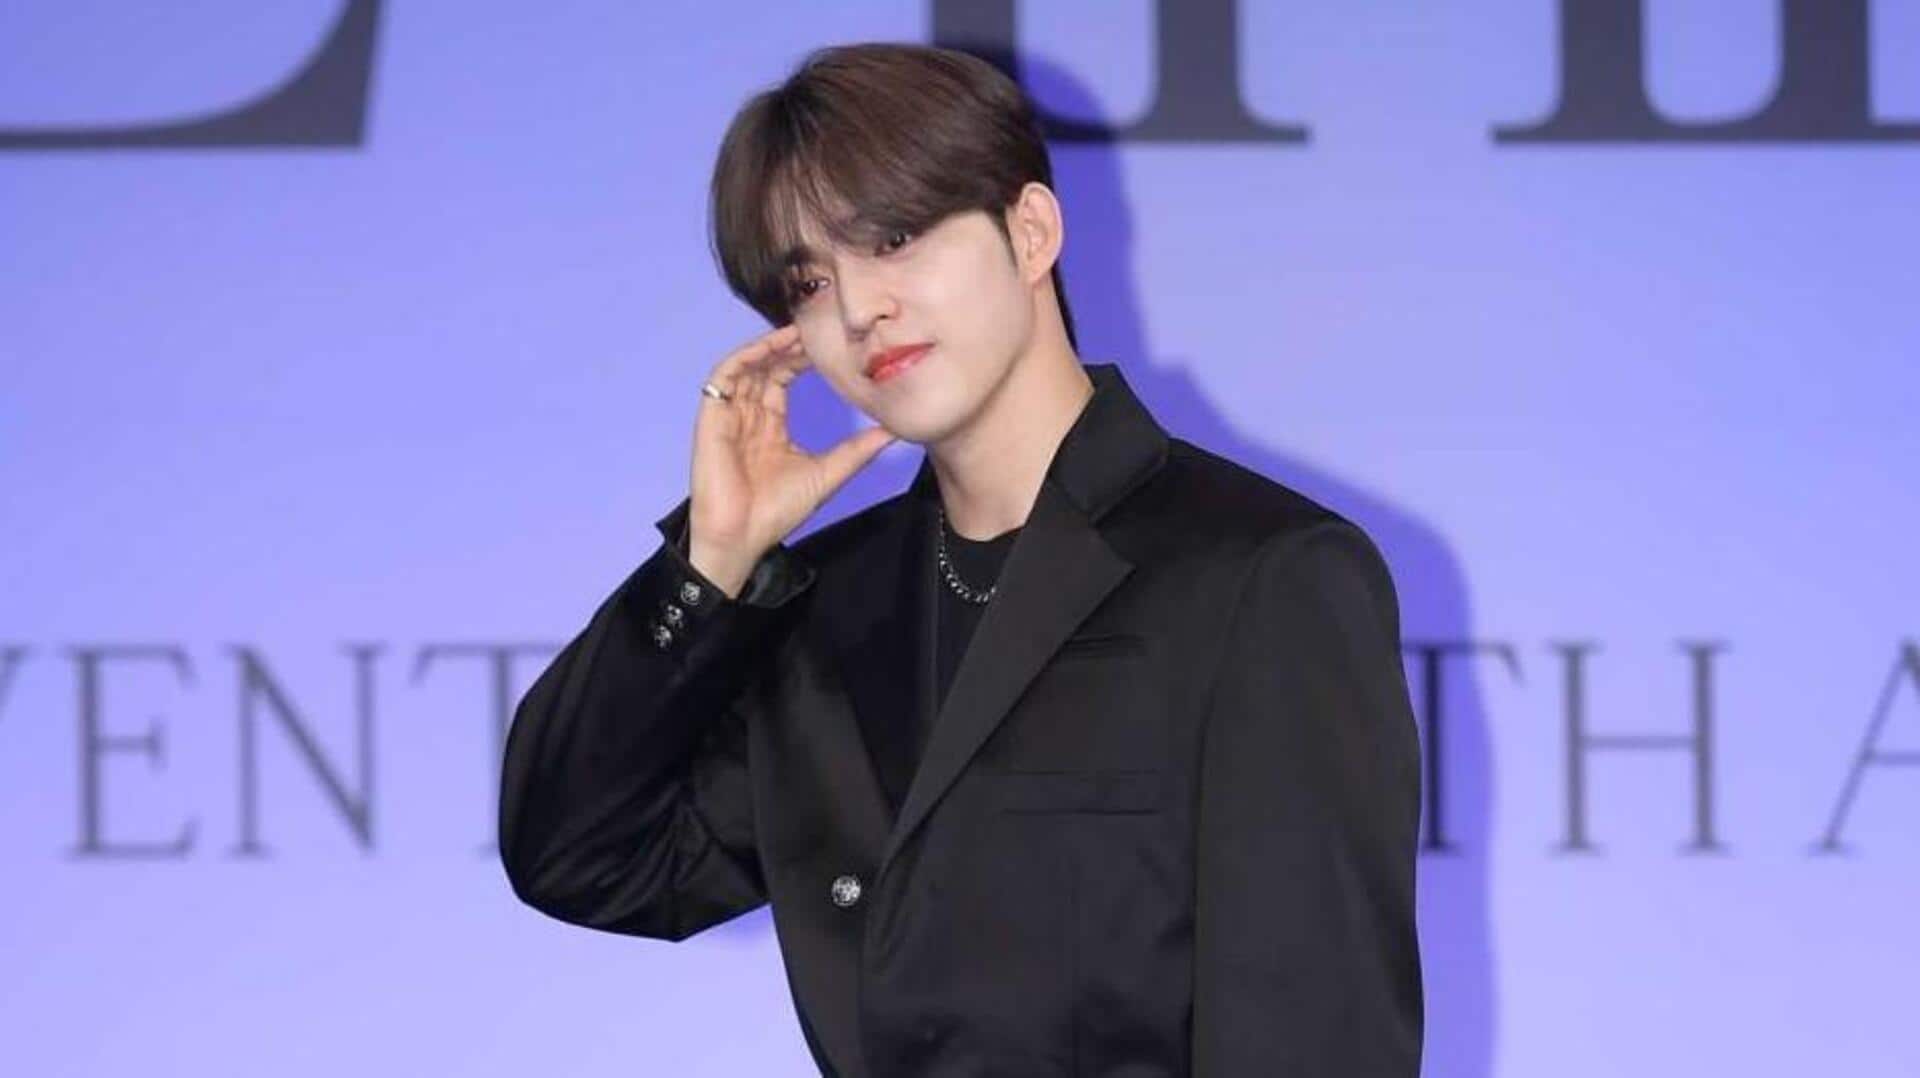 SEVENTEEN's S.Coups is recovering after surgery; agency releases statement